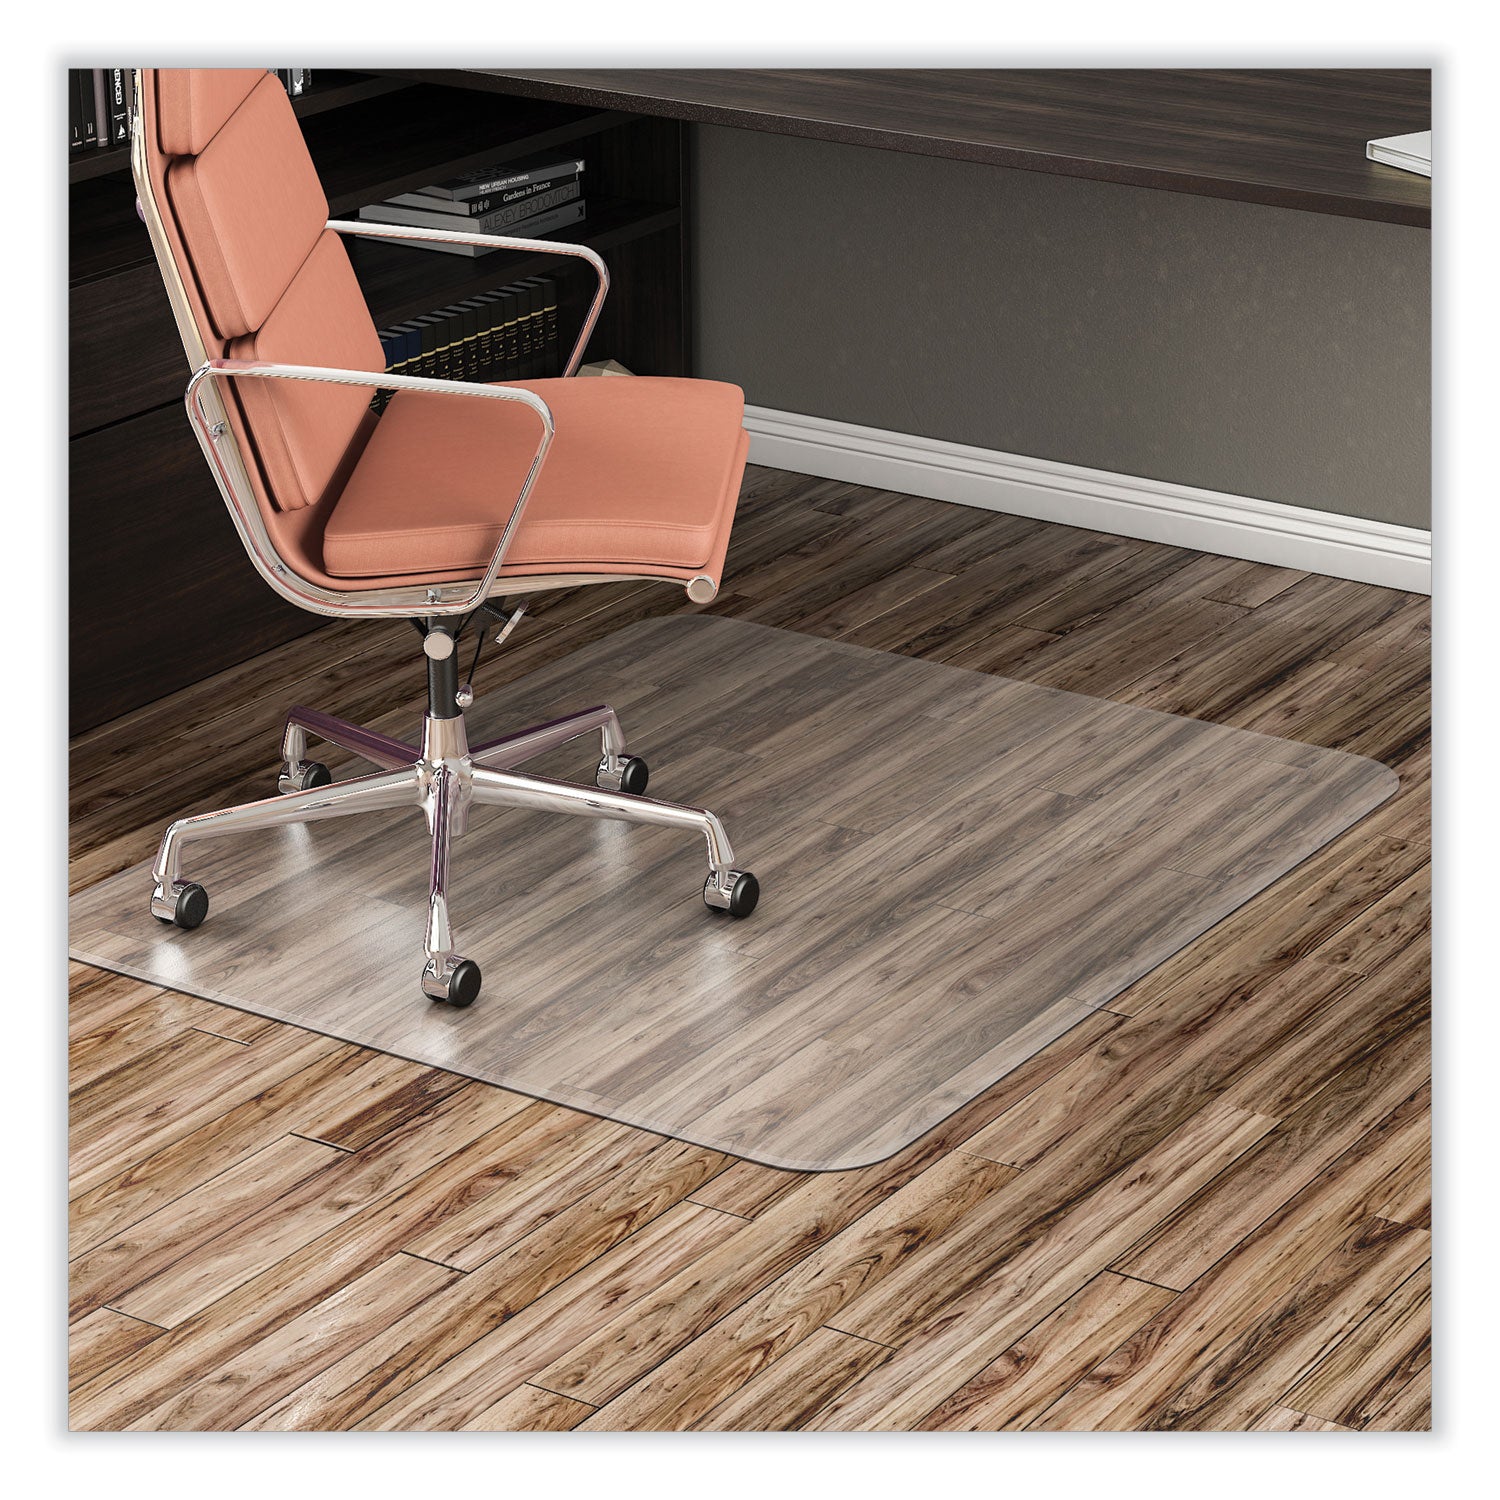 economat-all-day-use-chair-mat-for-hard-floors-flat-packed-45-x-53-clear_defcm2e242 - 2